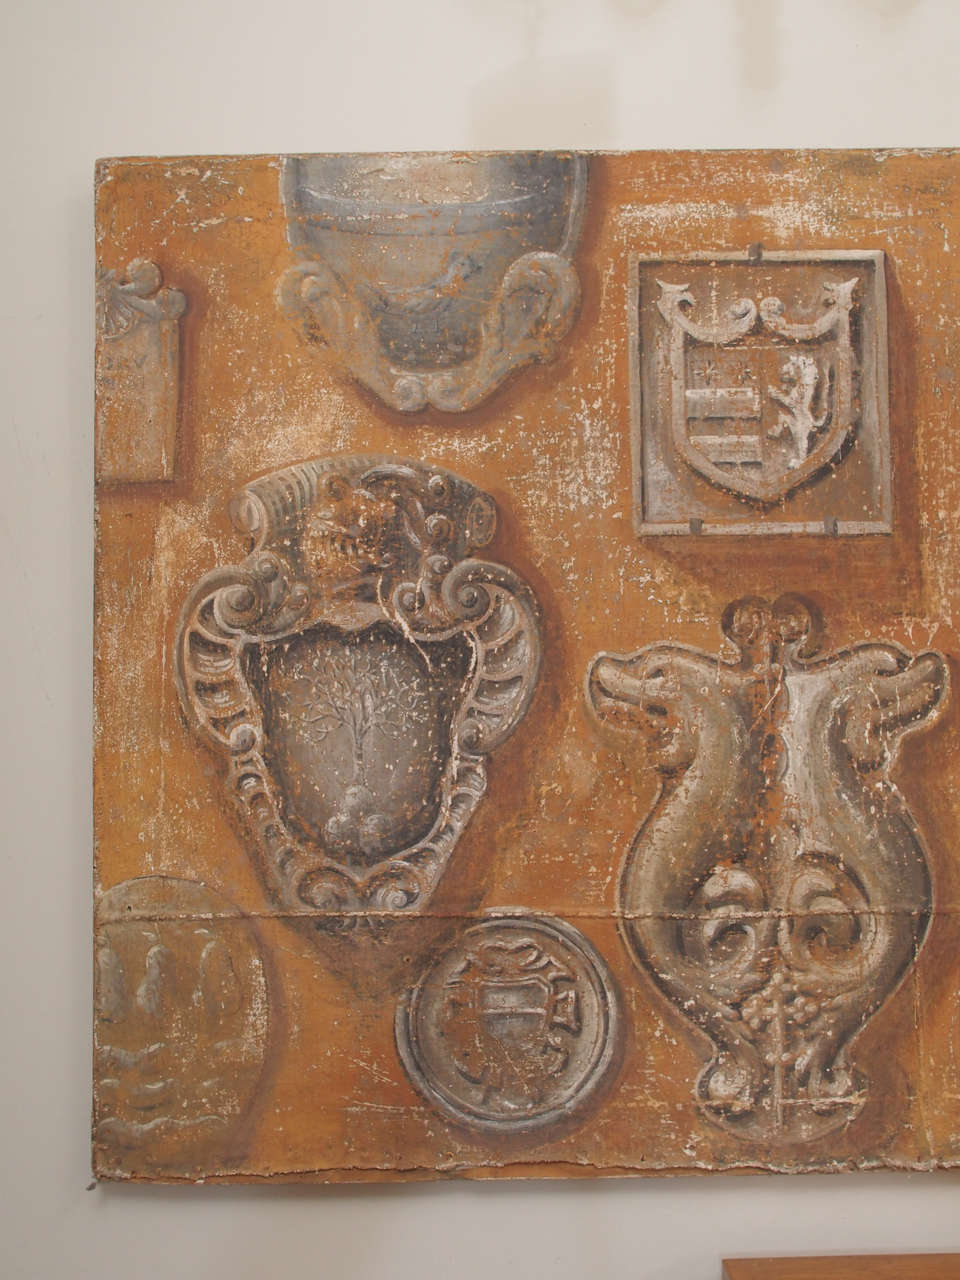 19th Century Large Antique Painting of a Mounted Collection of Stone Fragments and Emblems